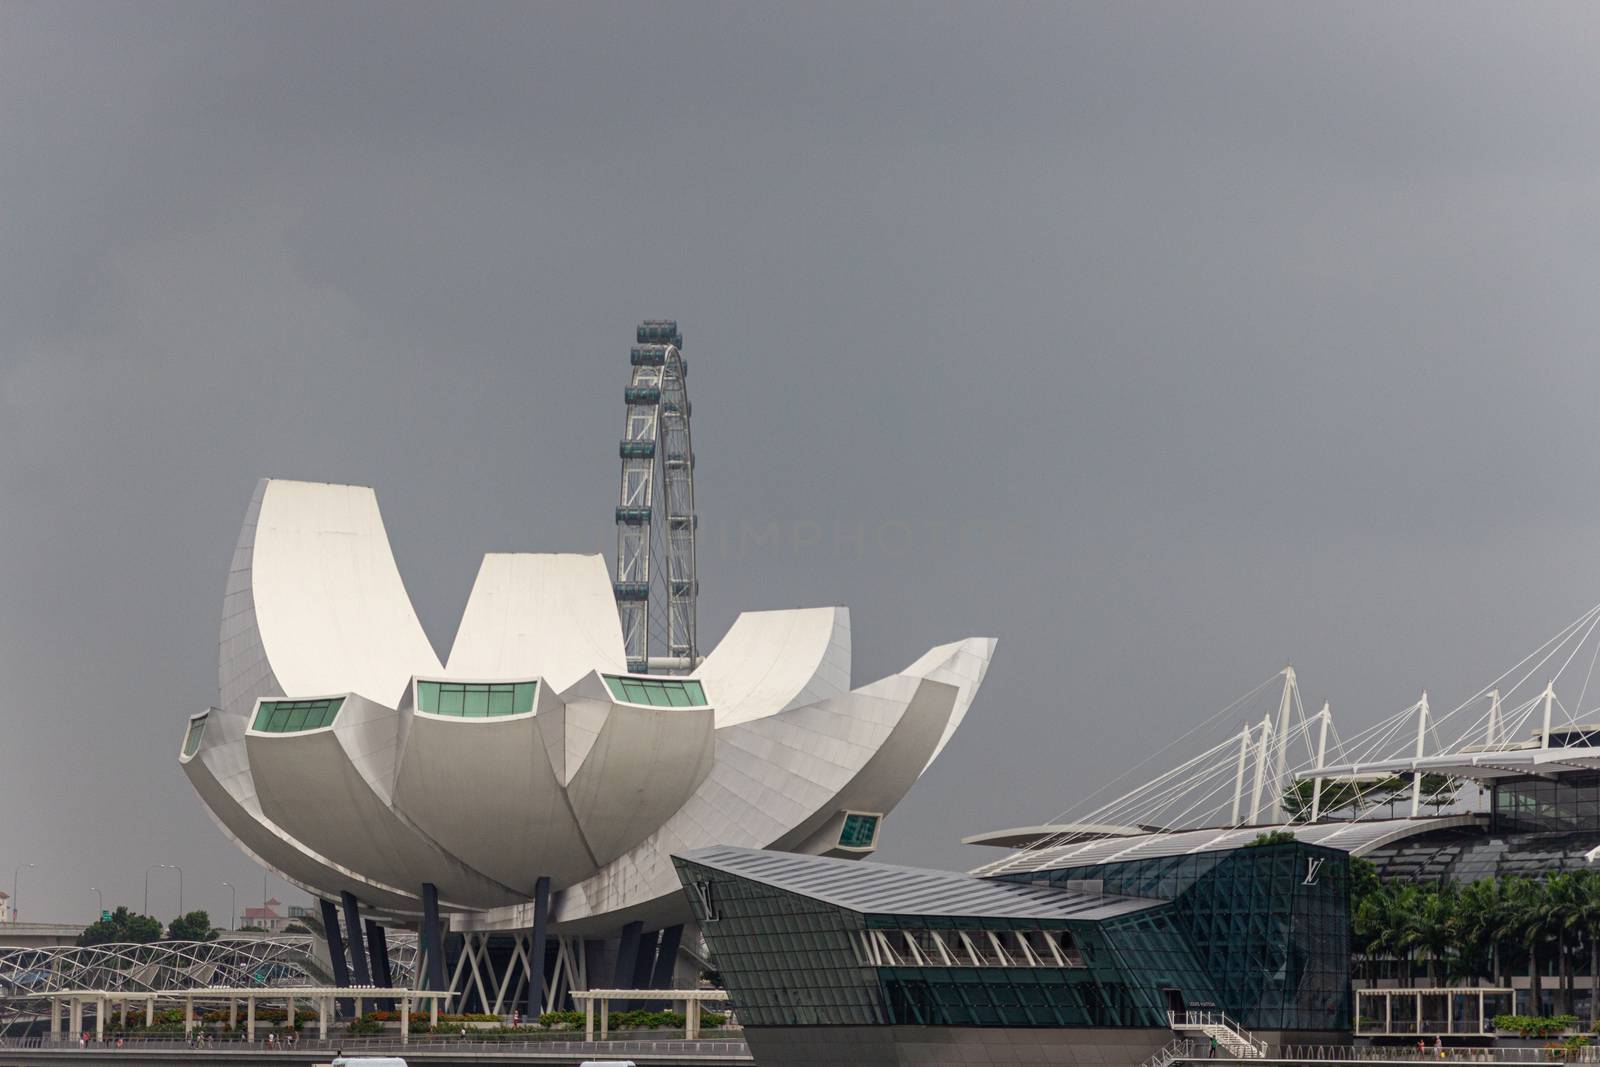 Singapore - CIRCA 2020: View of Art Museum and Singapore Flyer during the day with a stormy sky on the background.